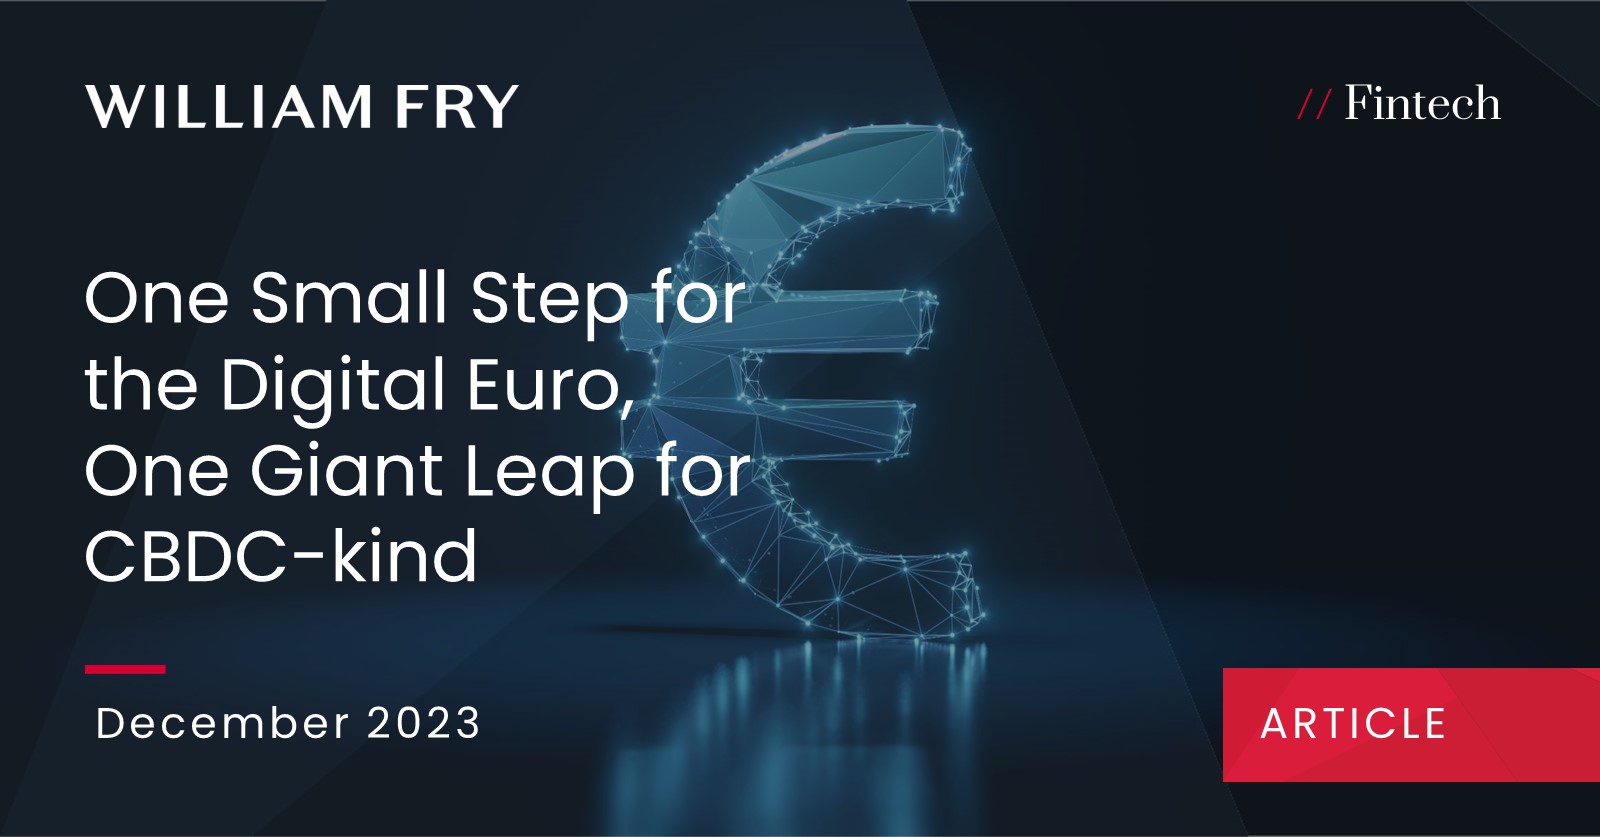 One Small Step for the Digital Euro, One Giant Leap for CBDC-kind